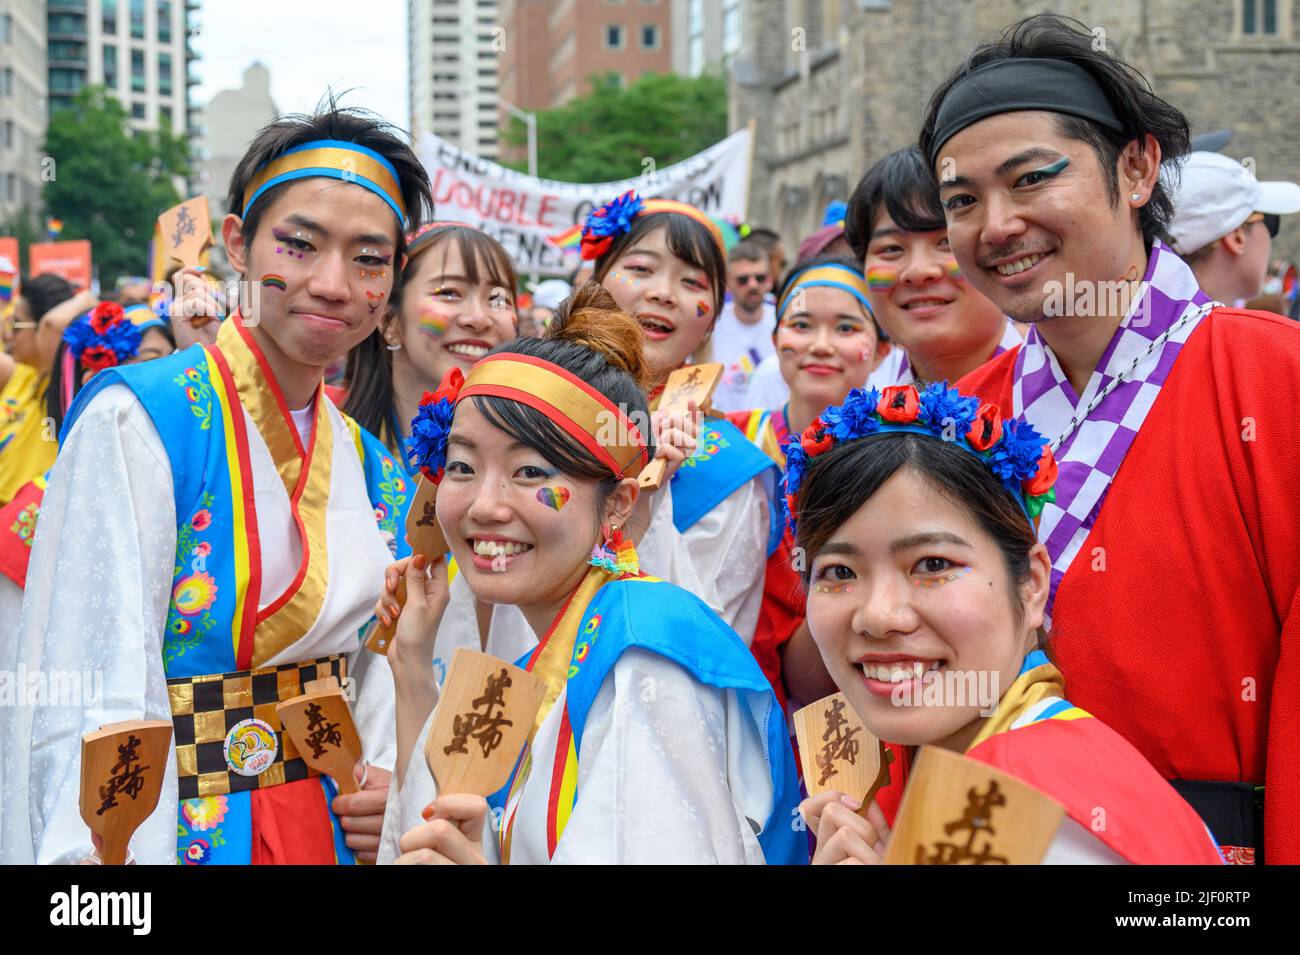 Group of people of Asian descent wearing colorful clothes during Pride Parade Stock Photo